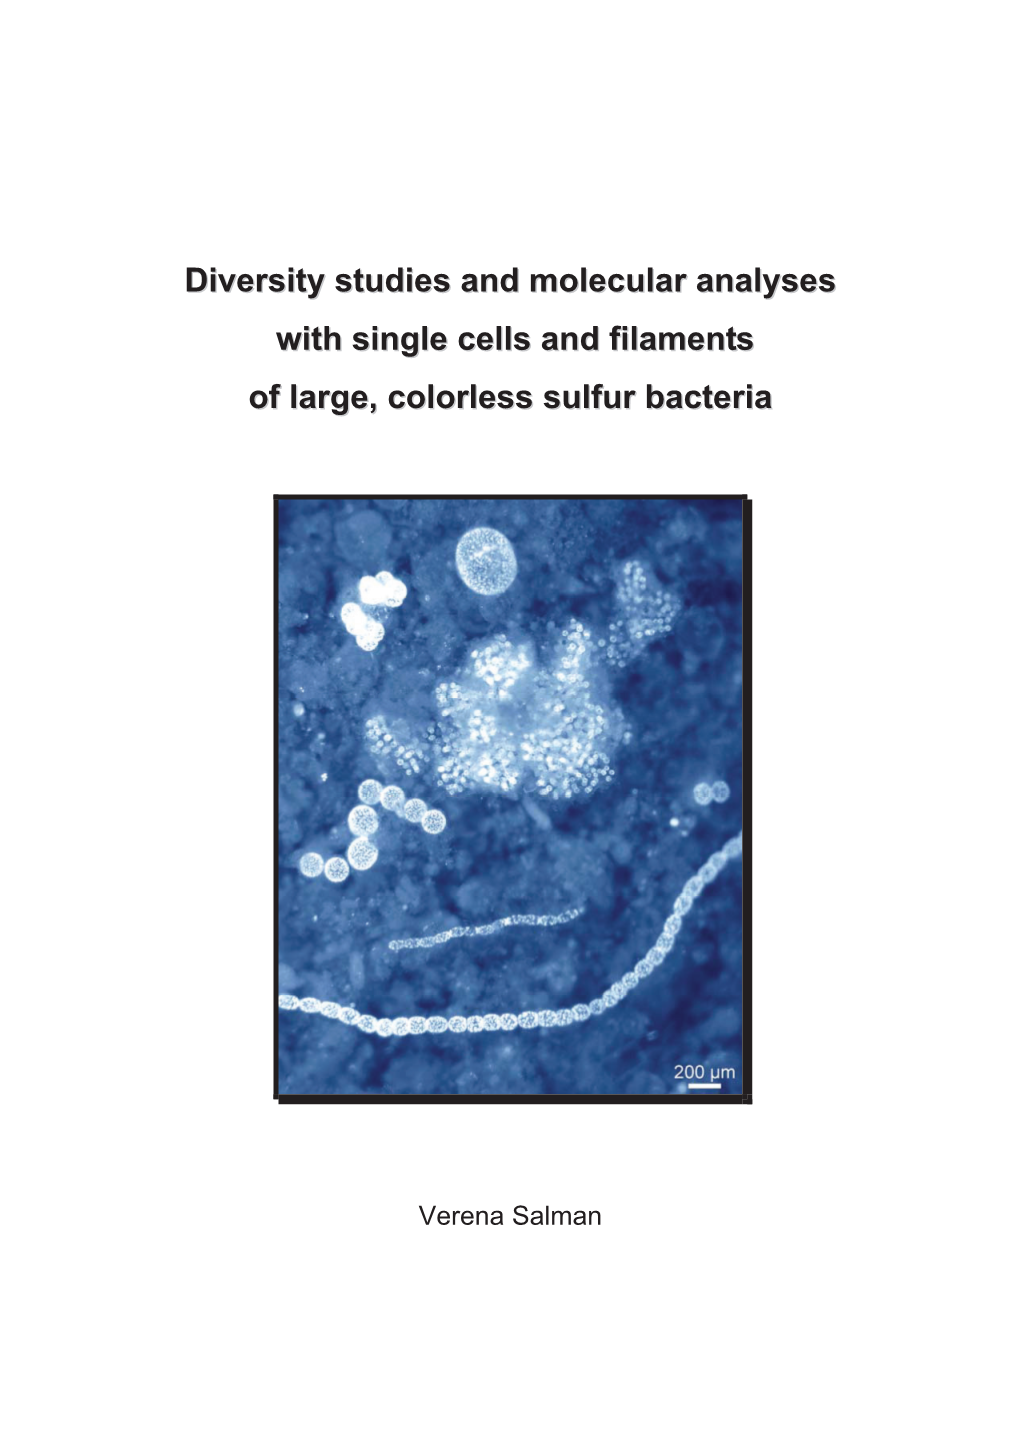 Diversity Studies and Molecular Analyses with Single Cells and Filaments of Large, Colorless Sulfur Bacteria